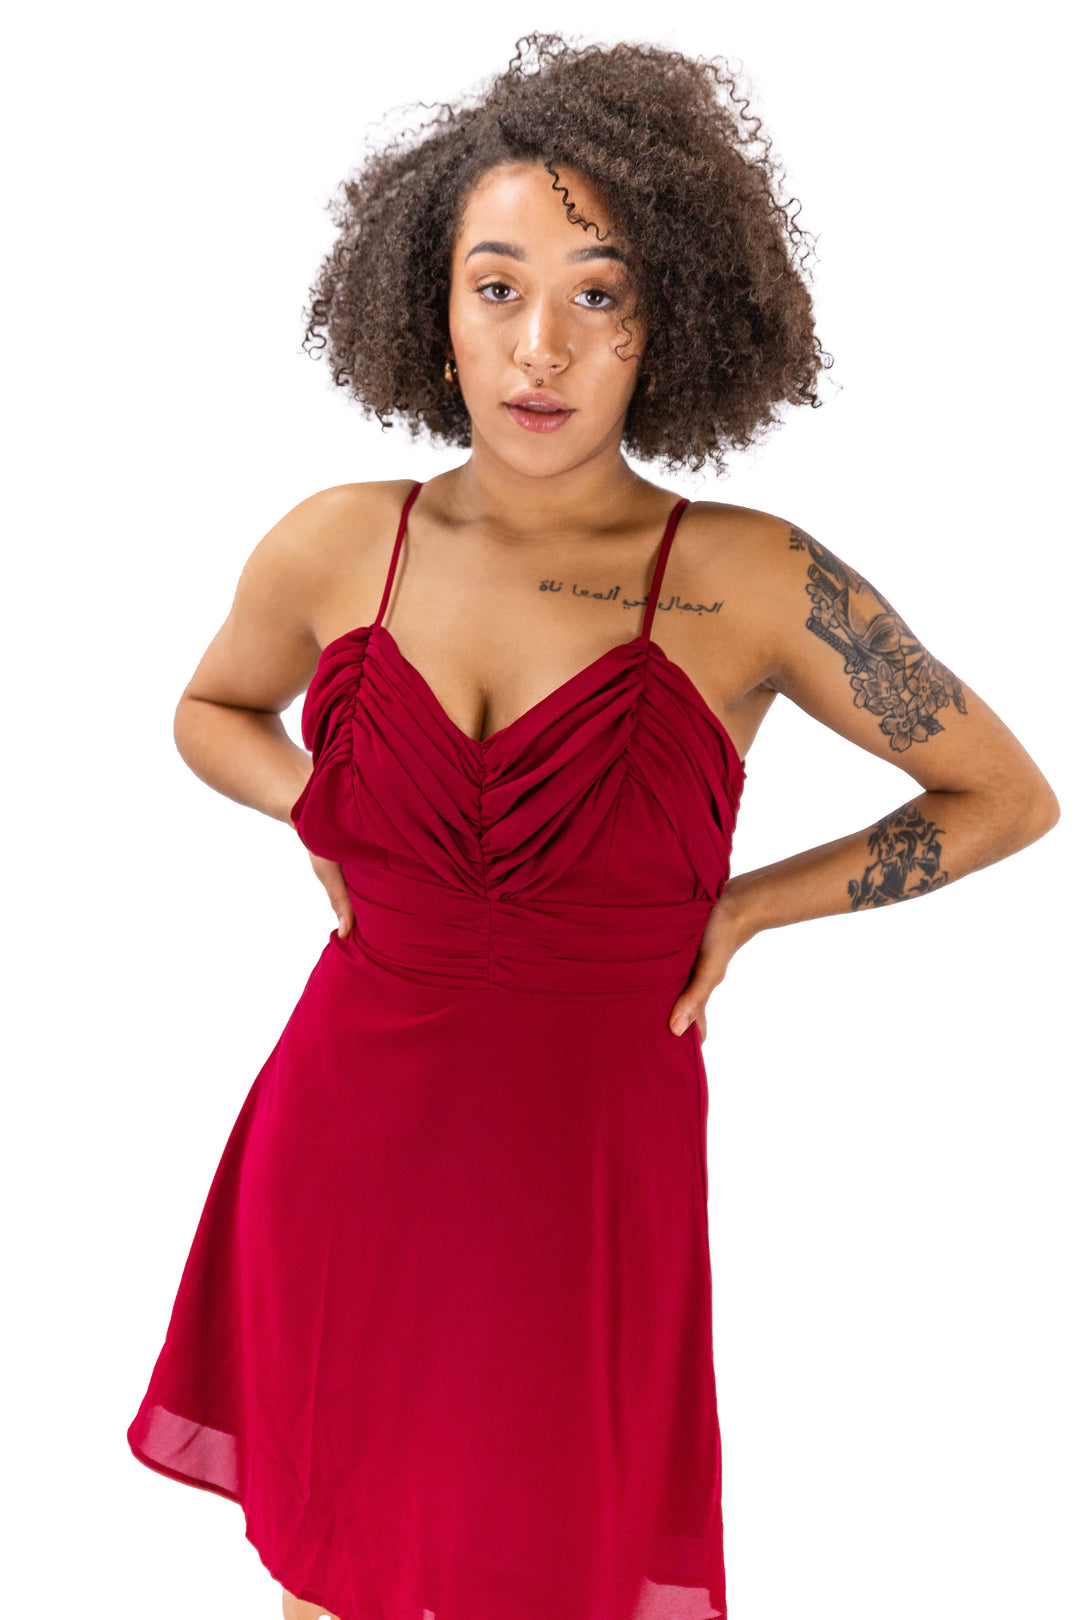 Fabonics Ruby Radiance Cocktail Dress with Elegant V-Neck and Strappy Design in Vibrant Ruby Red